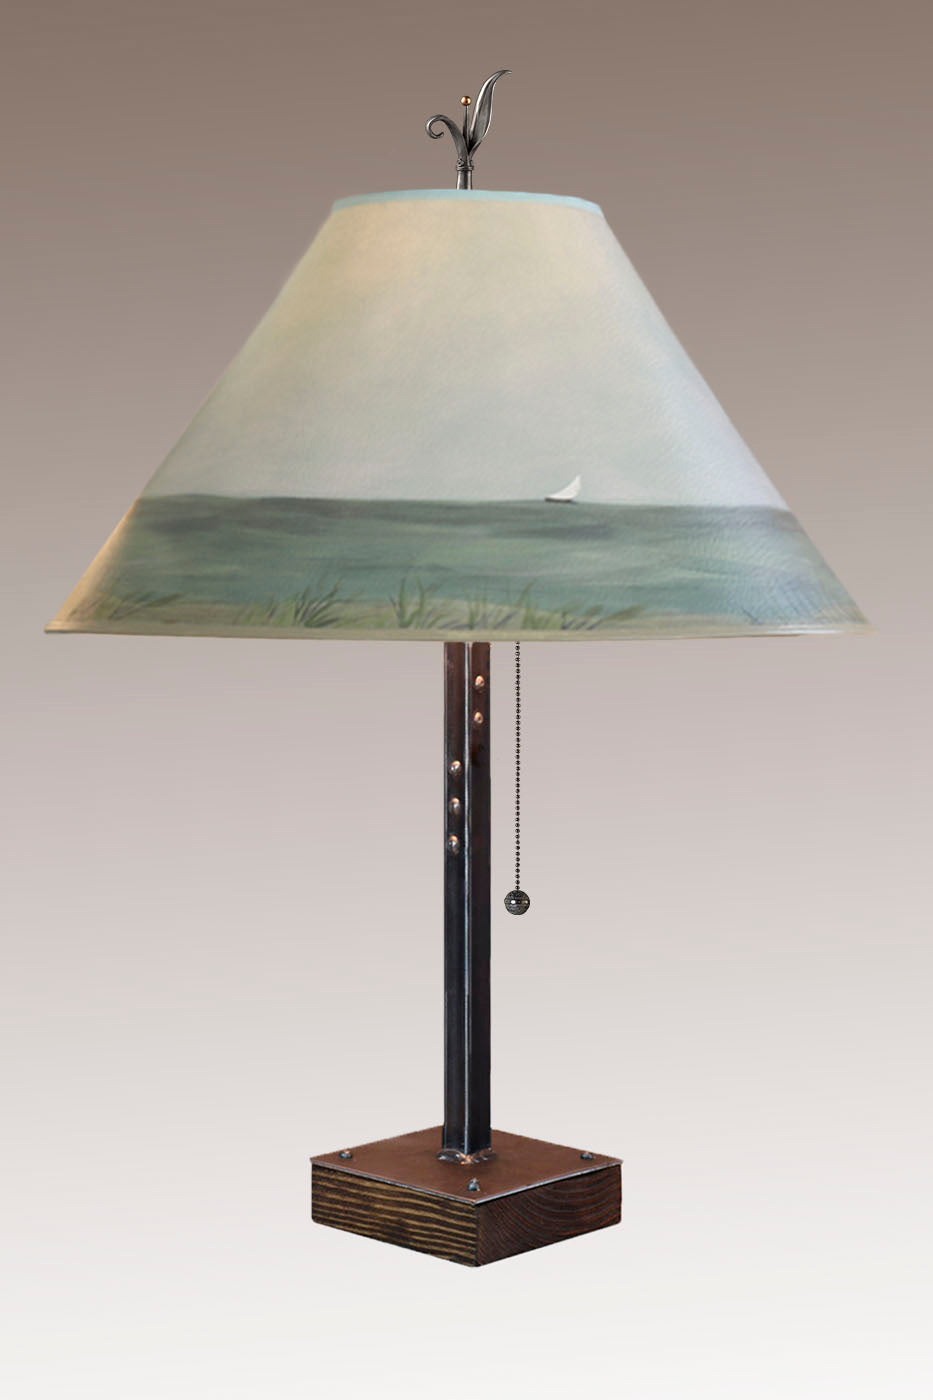 Janna Ugone &amp; Co Table Lamps Steel Table Lamp on Wood with Large Conical Shade in Shore